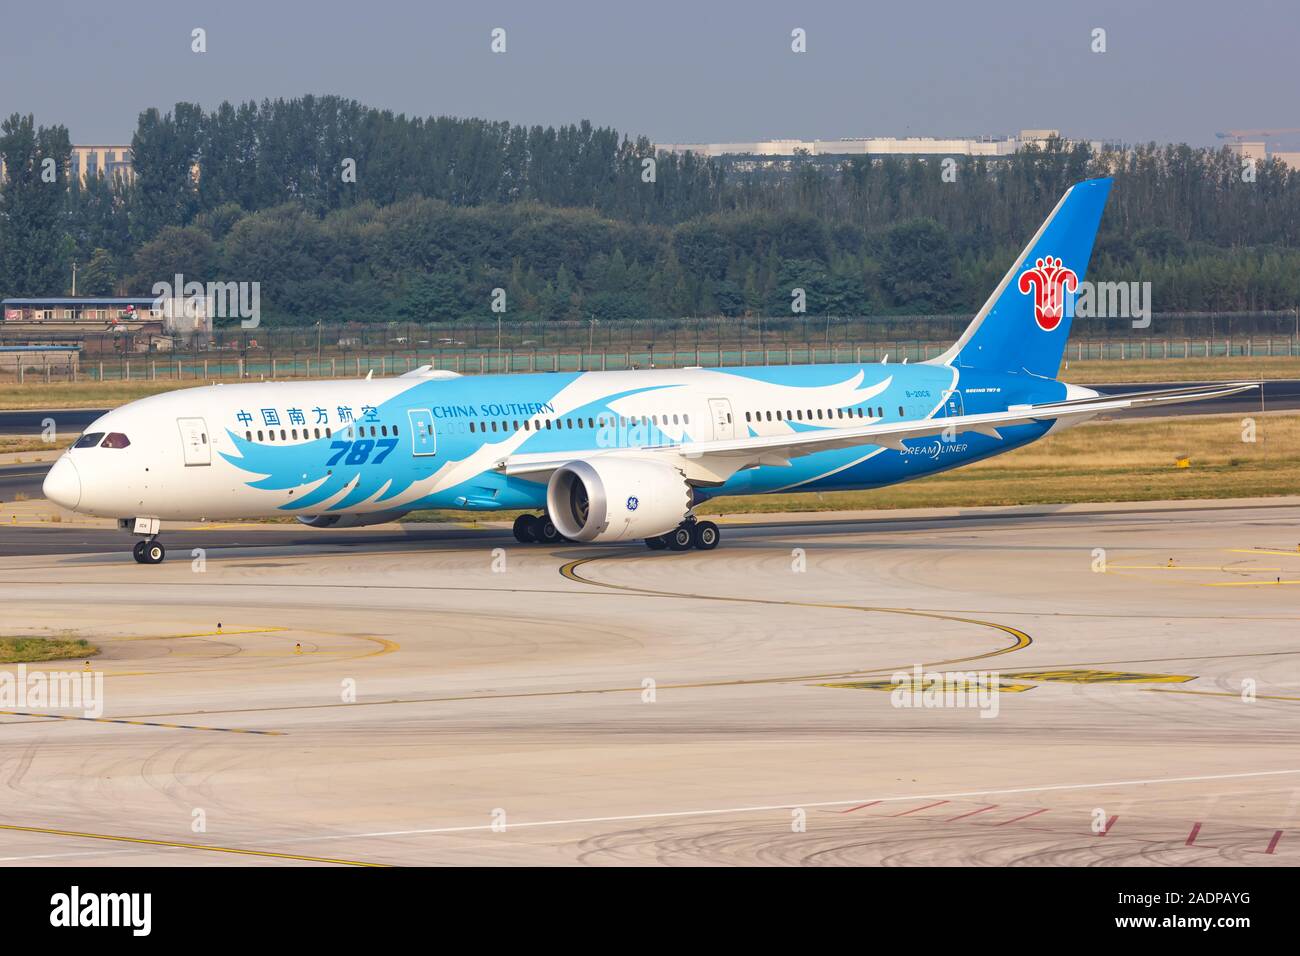 Beijing, China – October 2, 2019: China Southern Airlines Boeing 787-9 Dreamliner airplane at Beijing airport (PEK) in China. Stock Photo